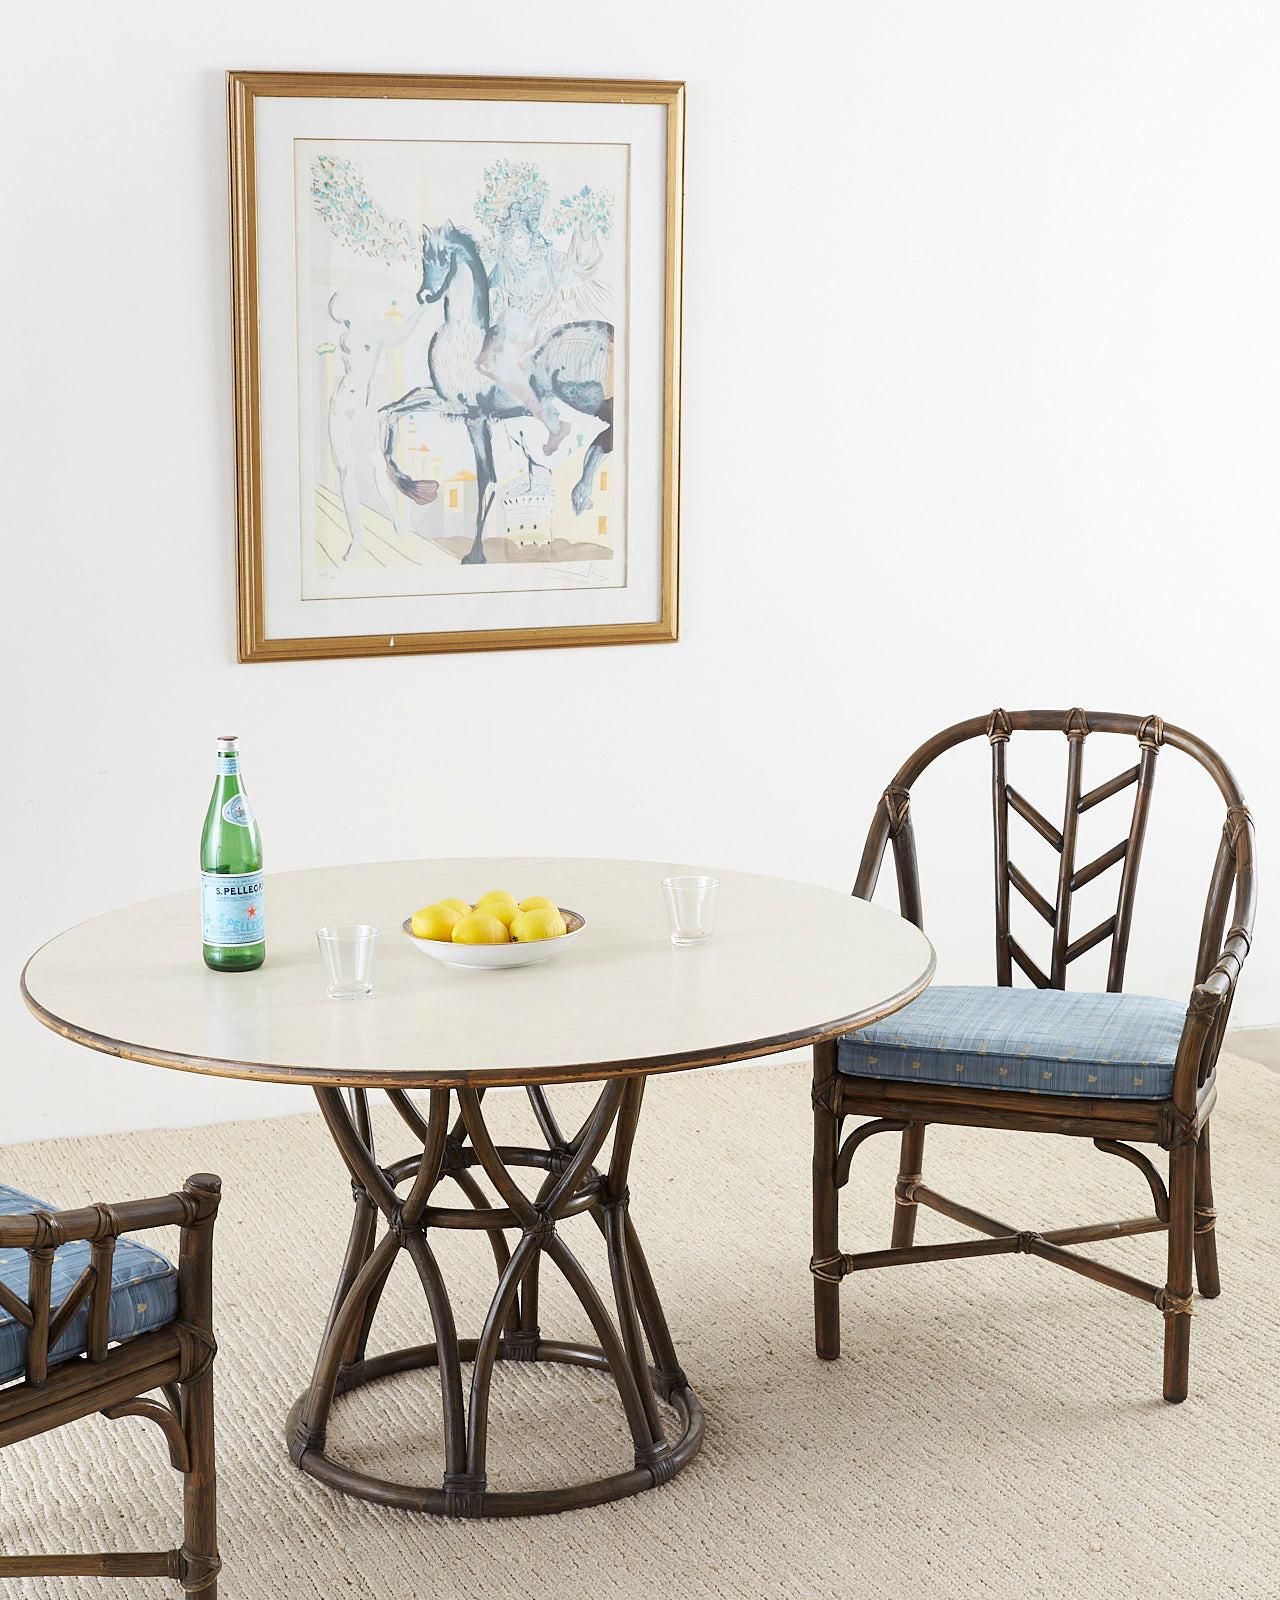 Stylish organic modern round game table or dining table made by McGuire. Features a bamboo rattan basket base with an hourglass form reinforced with leather rawhide laces. The round top has a formica style material with a bamboo edge. Made in the